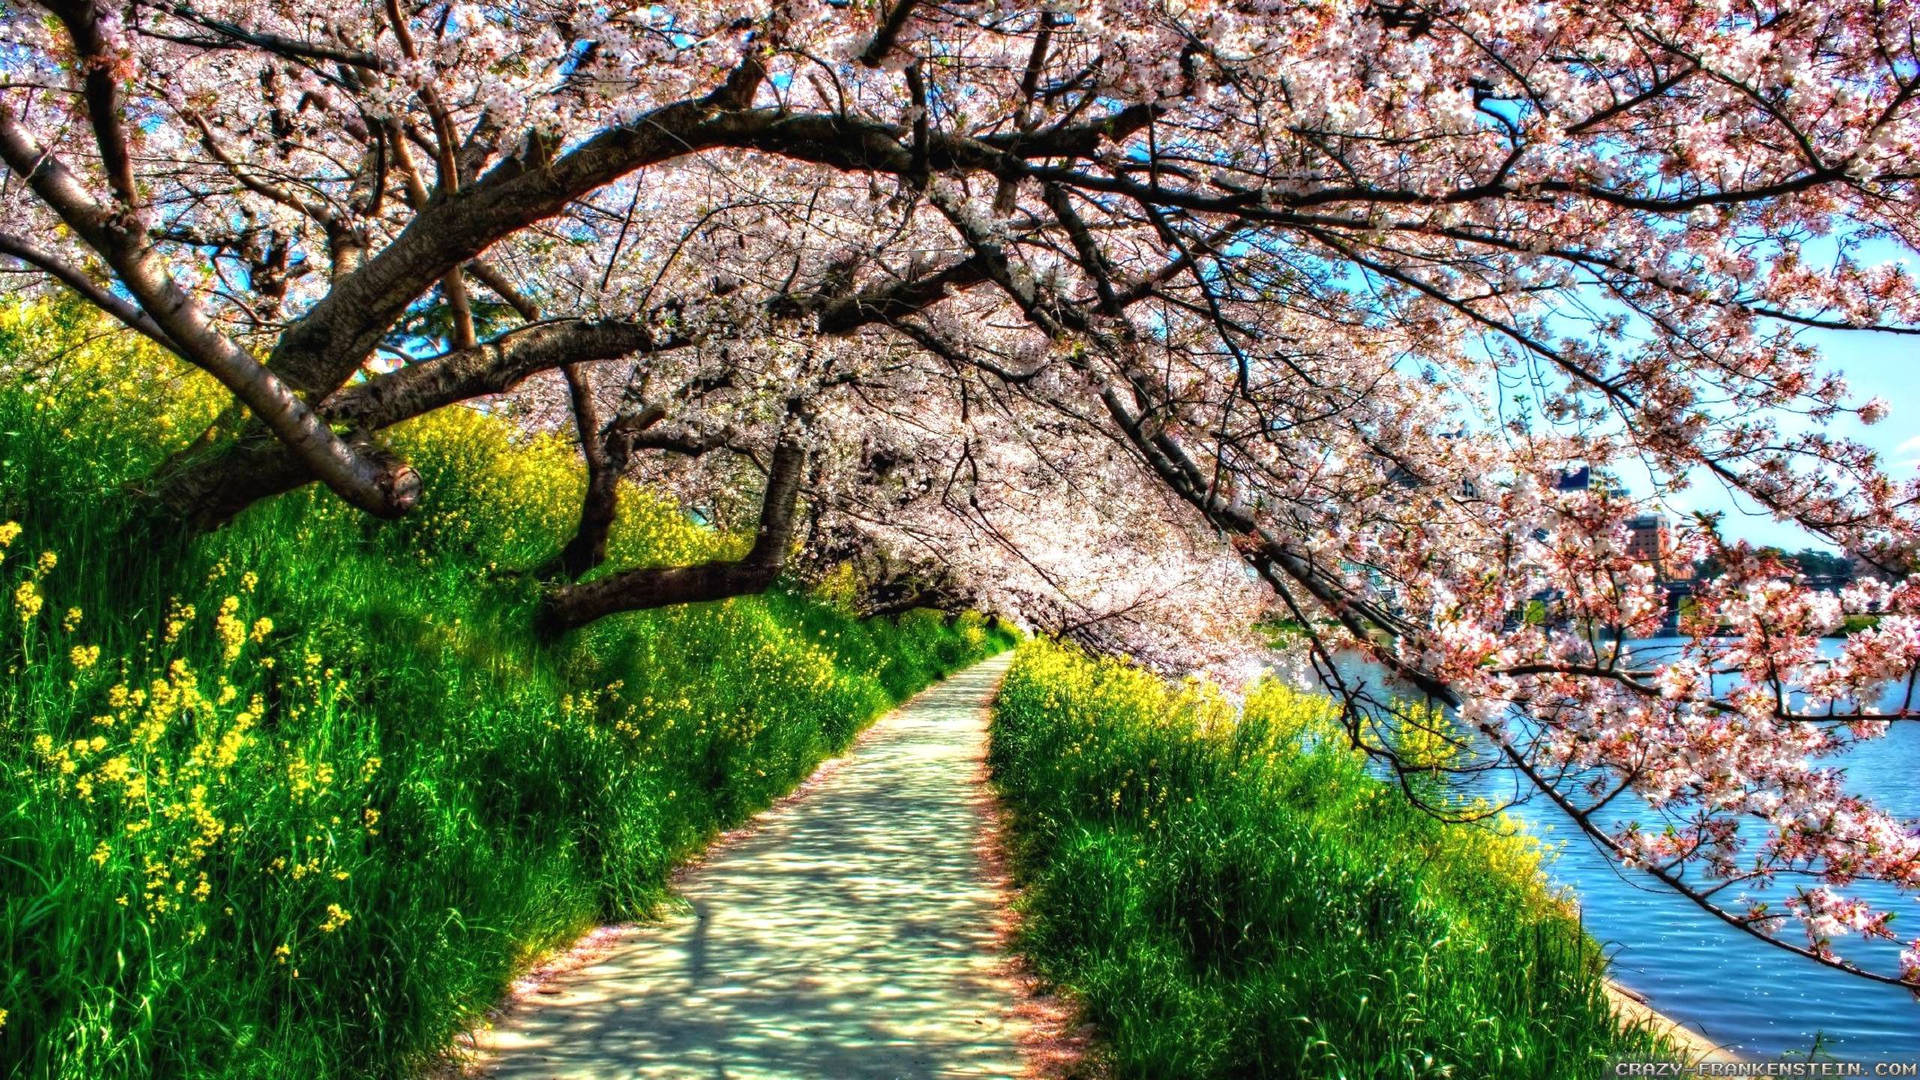 A Vibrant Landscape View Of A Lush 4k Spring